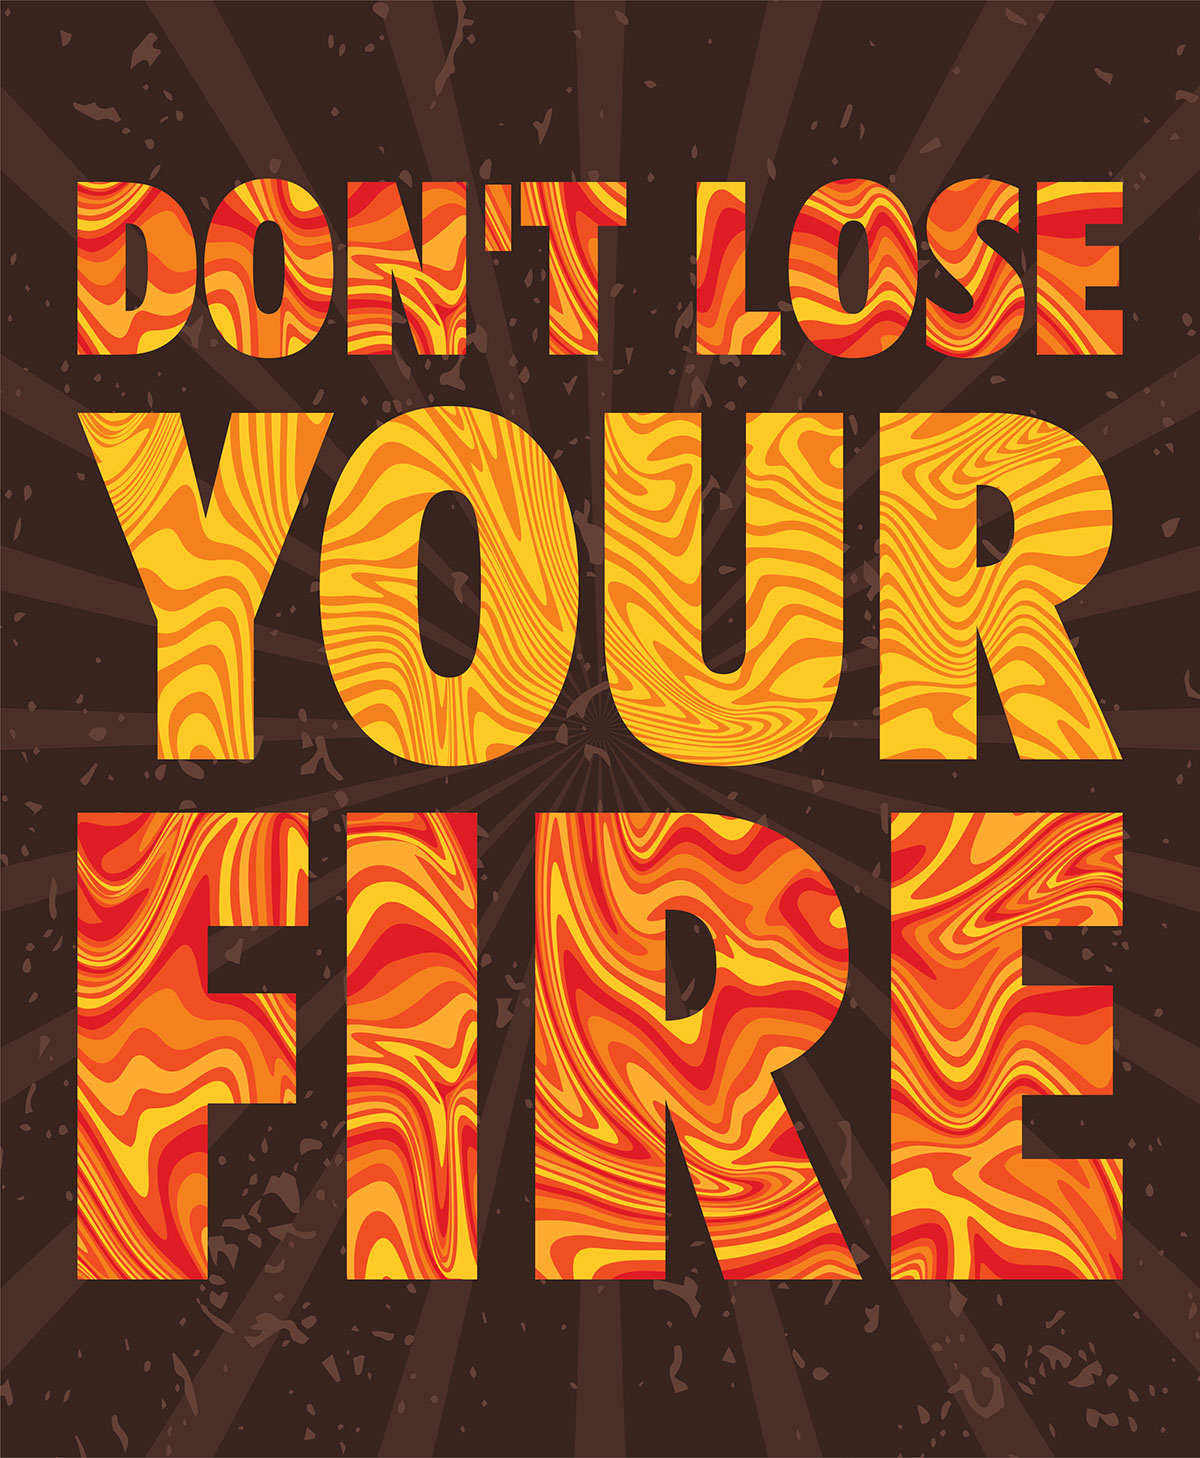 Dont Lose Your Fire rendition image